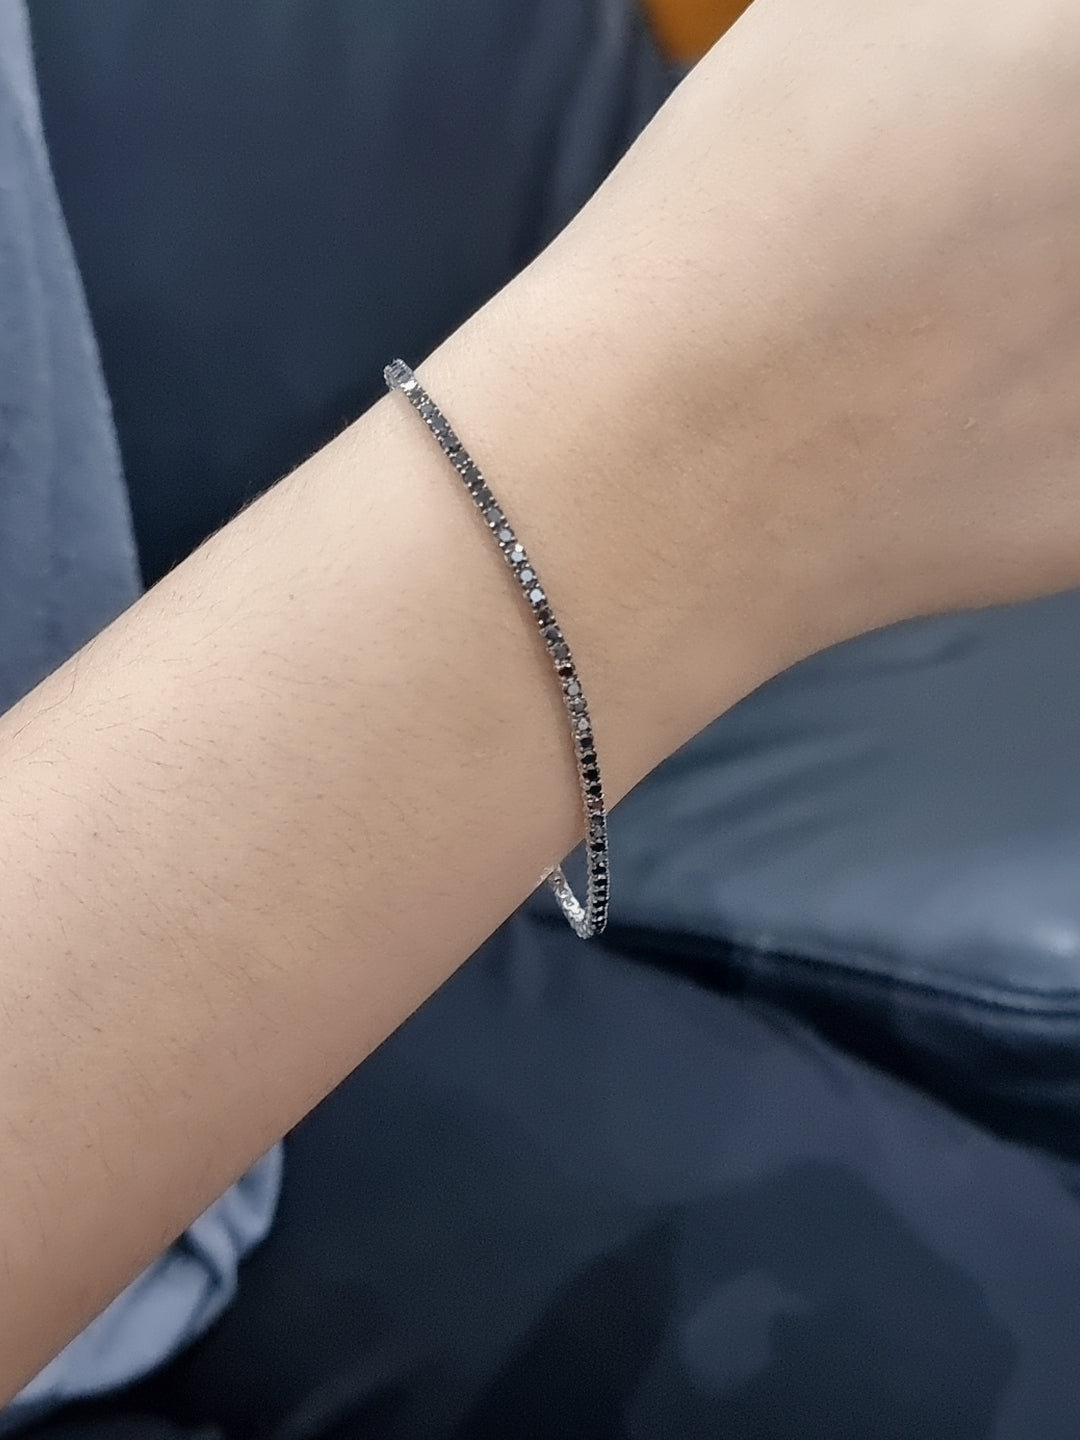 Stunning Tennis Bracelet Featuring 3.03 Carat Round Cut Black Diamonds, Proportionately Matched For Size And The Best Quality Look. Beautifully Crafted In 18k White Gold. 